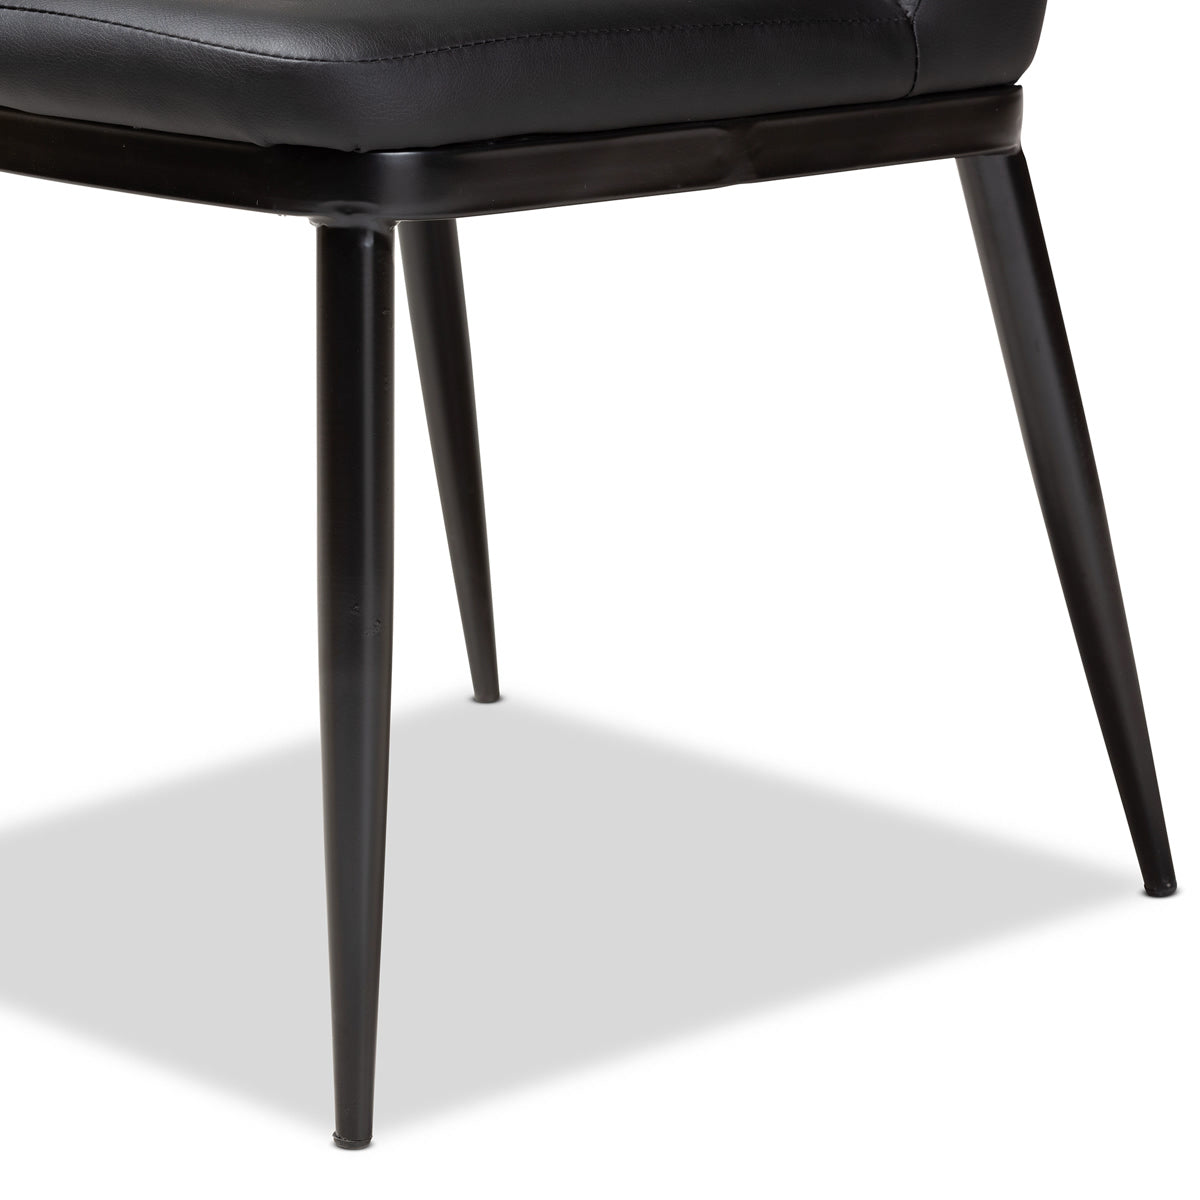 Baxton Studio Darcell Modern and Contemporary Black Faux Leather Upholstered Dining Chair (Set of 4) Baxton Studio-dining chair-Minimal And Modern - 2